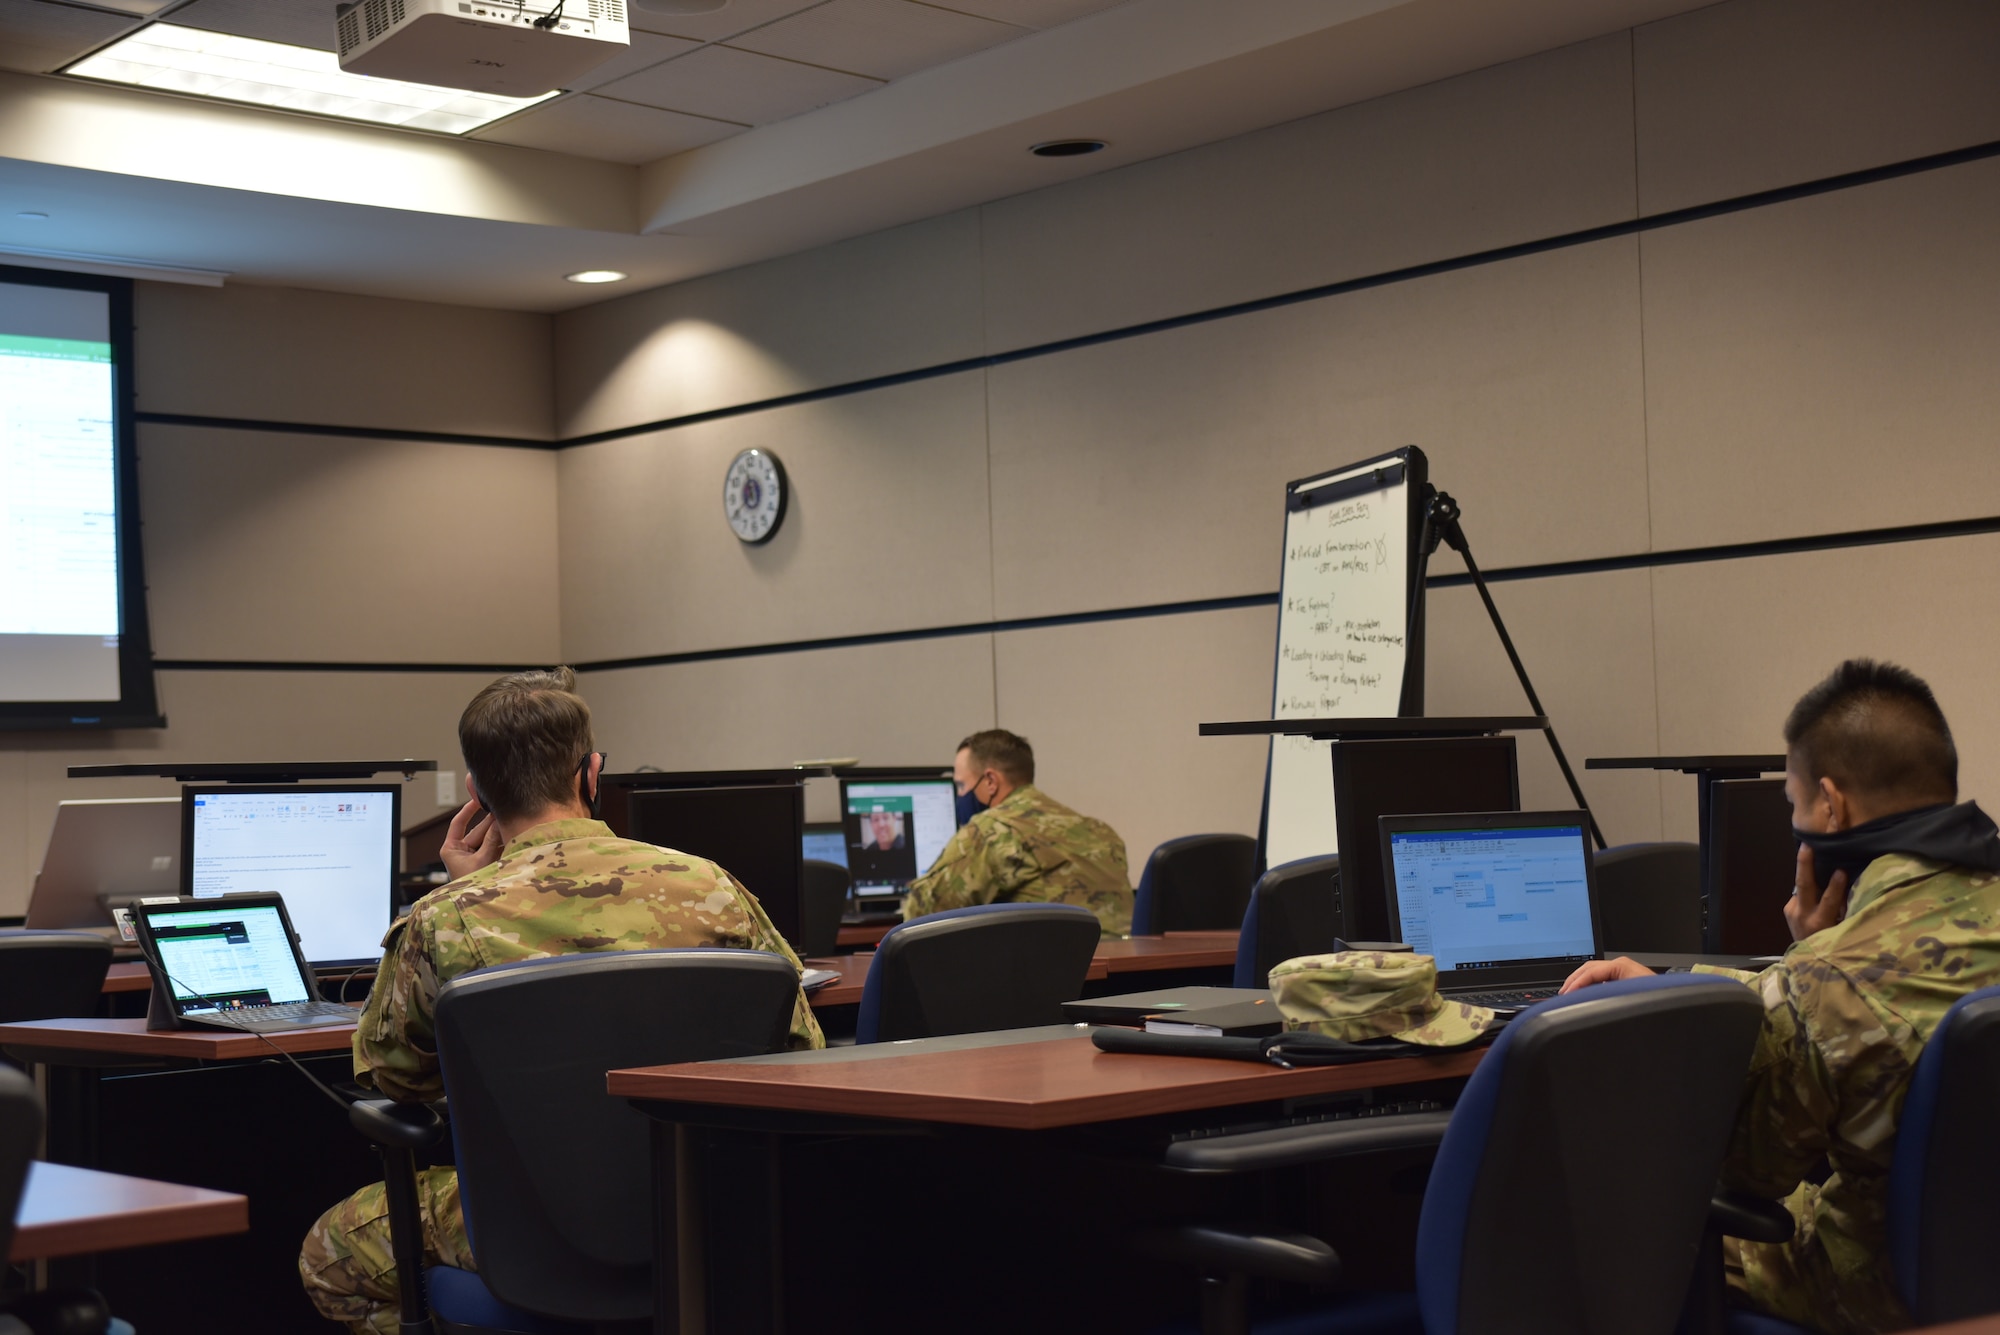 Members of the U.S. Air Force Expeditionary Center host a virtual instructional system development conference with more than 40 participants across multiple U.S. Air Force major commands, July 16, 2020, at Joint Base McGuire-Dix-Lakehurst, New Jersey. The purpose of the conference was to start the development of a training program based on the multi-capable Airmen training syllabus for agile combat employment, which was approved in January. The commands that took part in the virtual instructional system development conference included U.S. Air Forces in Europe-Air Forces Africa, Air Combat Command, Air Mobility Command, Pacific Air Forces, Air Education and Training Command, National Guard Bureau, Air Force Reserve Command, Air Force Global Strike Command, Air Force Flight Standards Agency, and Headquarters Air Force. (U.S. Air Force photo by Maj. George Tobias)